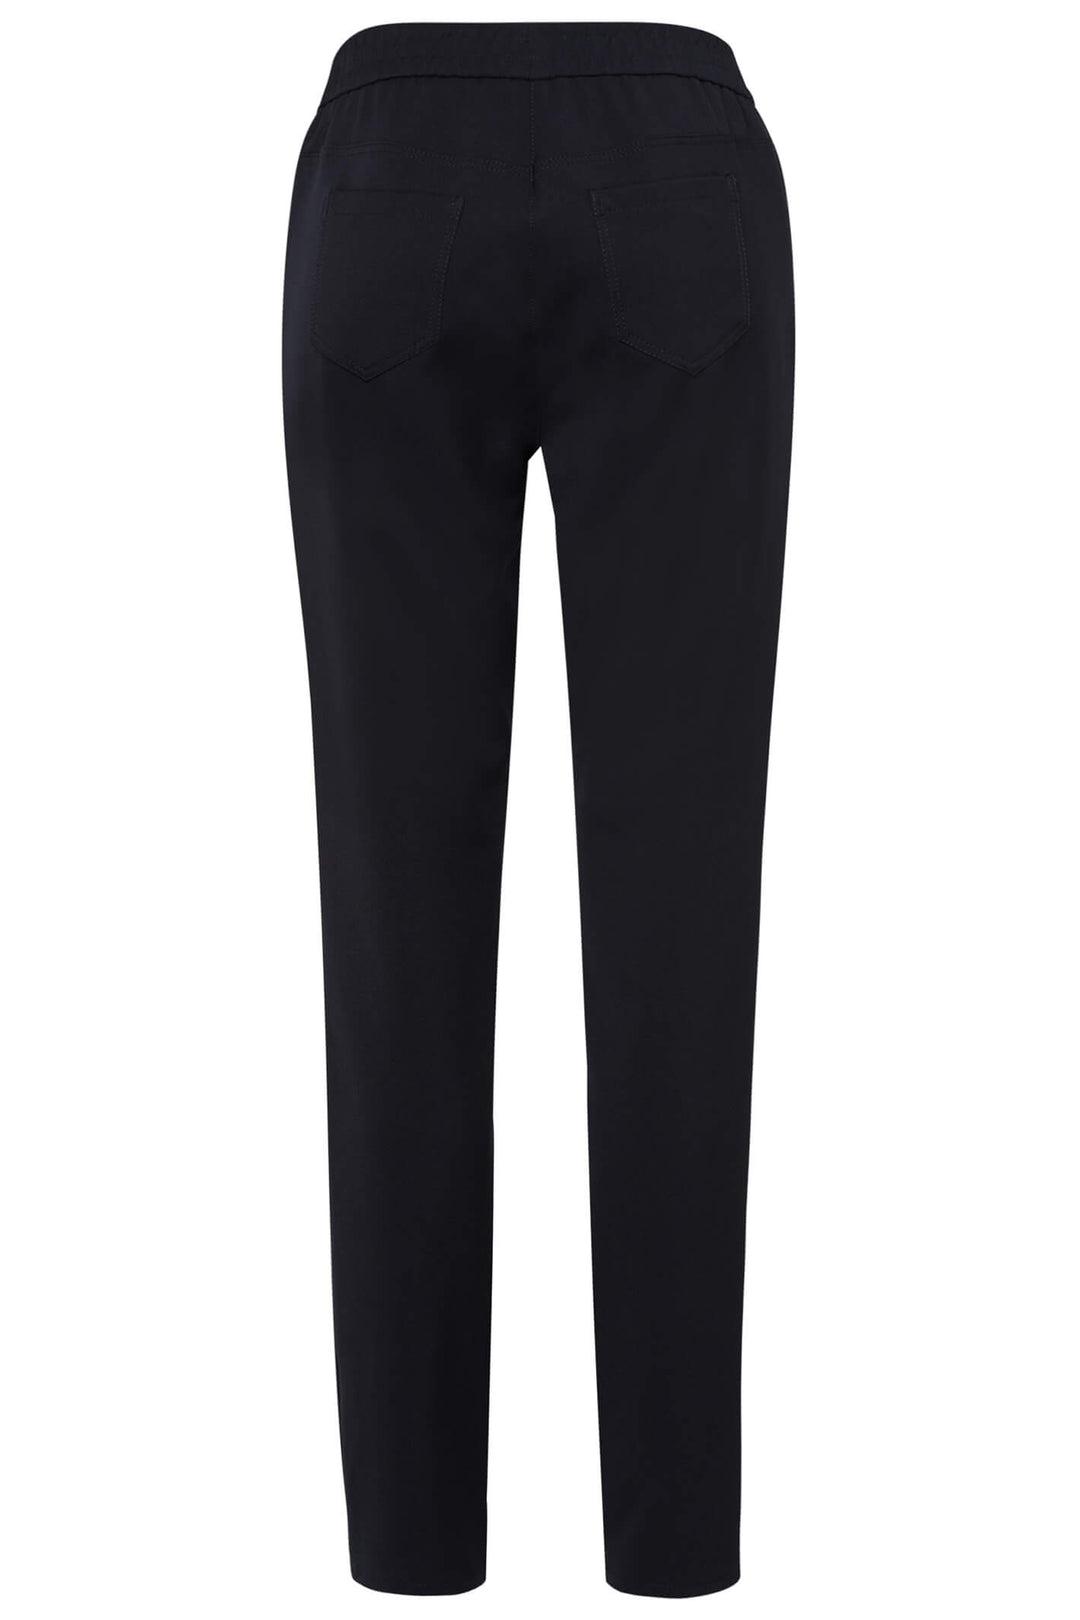 Frank Walder 722607 000 598 Ink Blue Tie Waist Pull-On Trousers - Shirley Allum Boutique